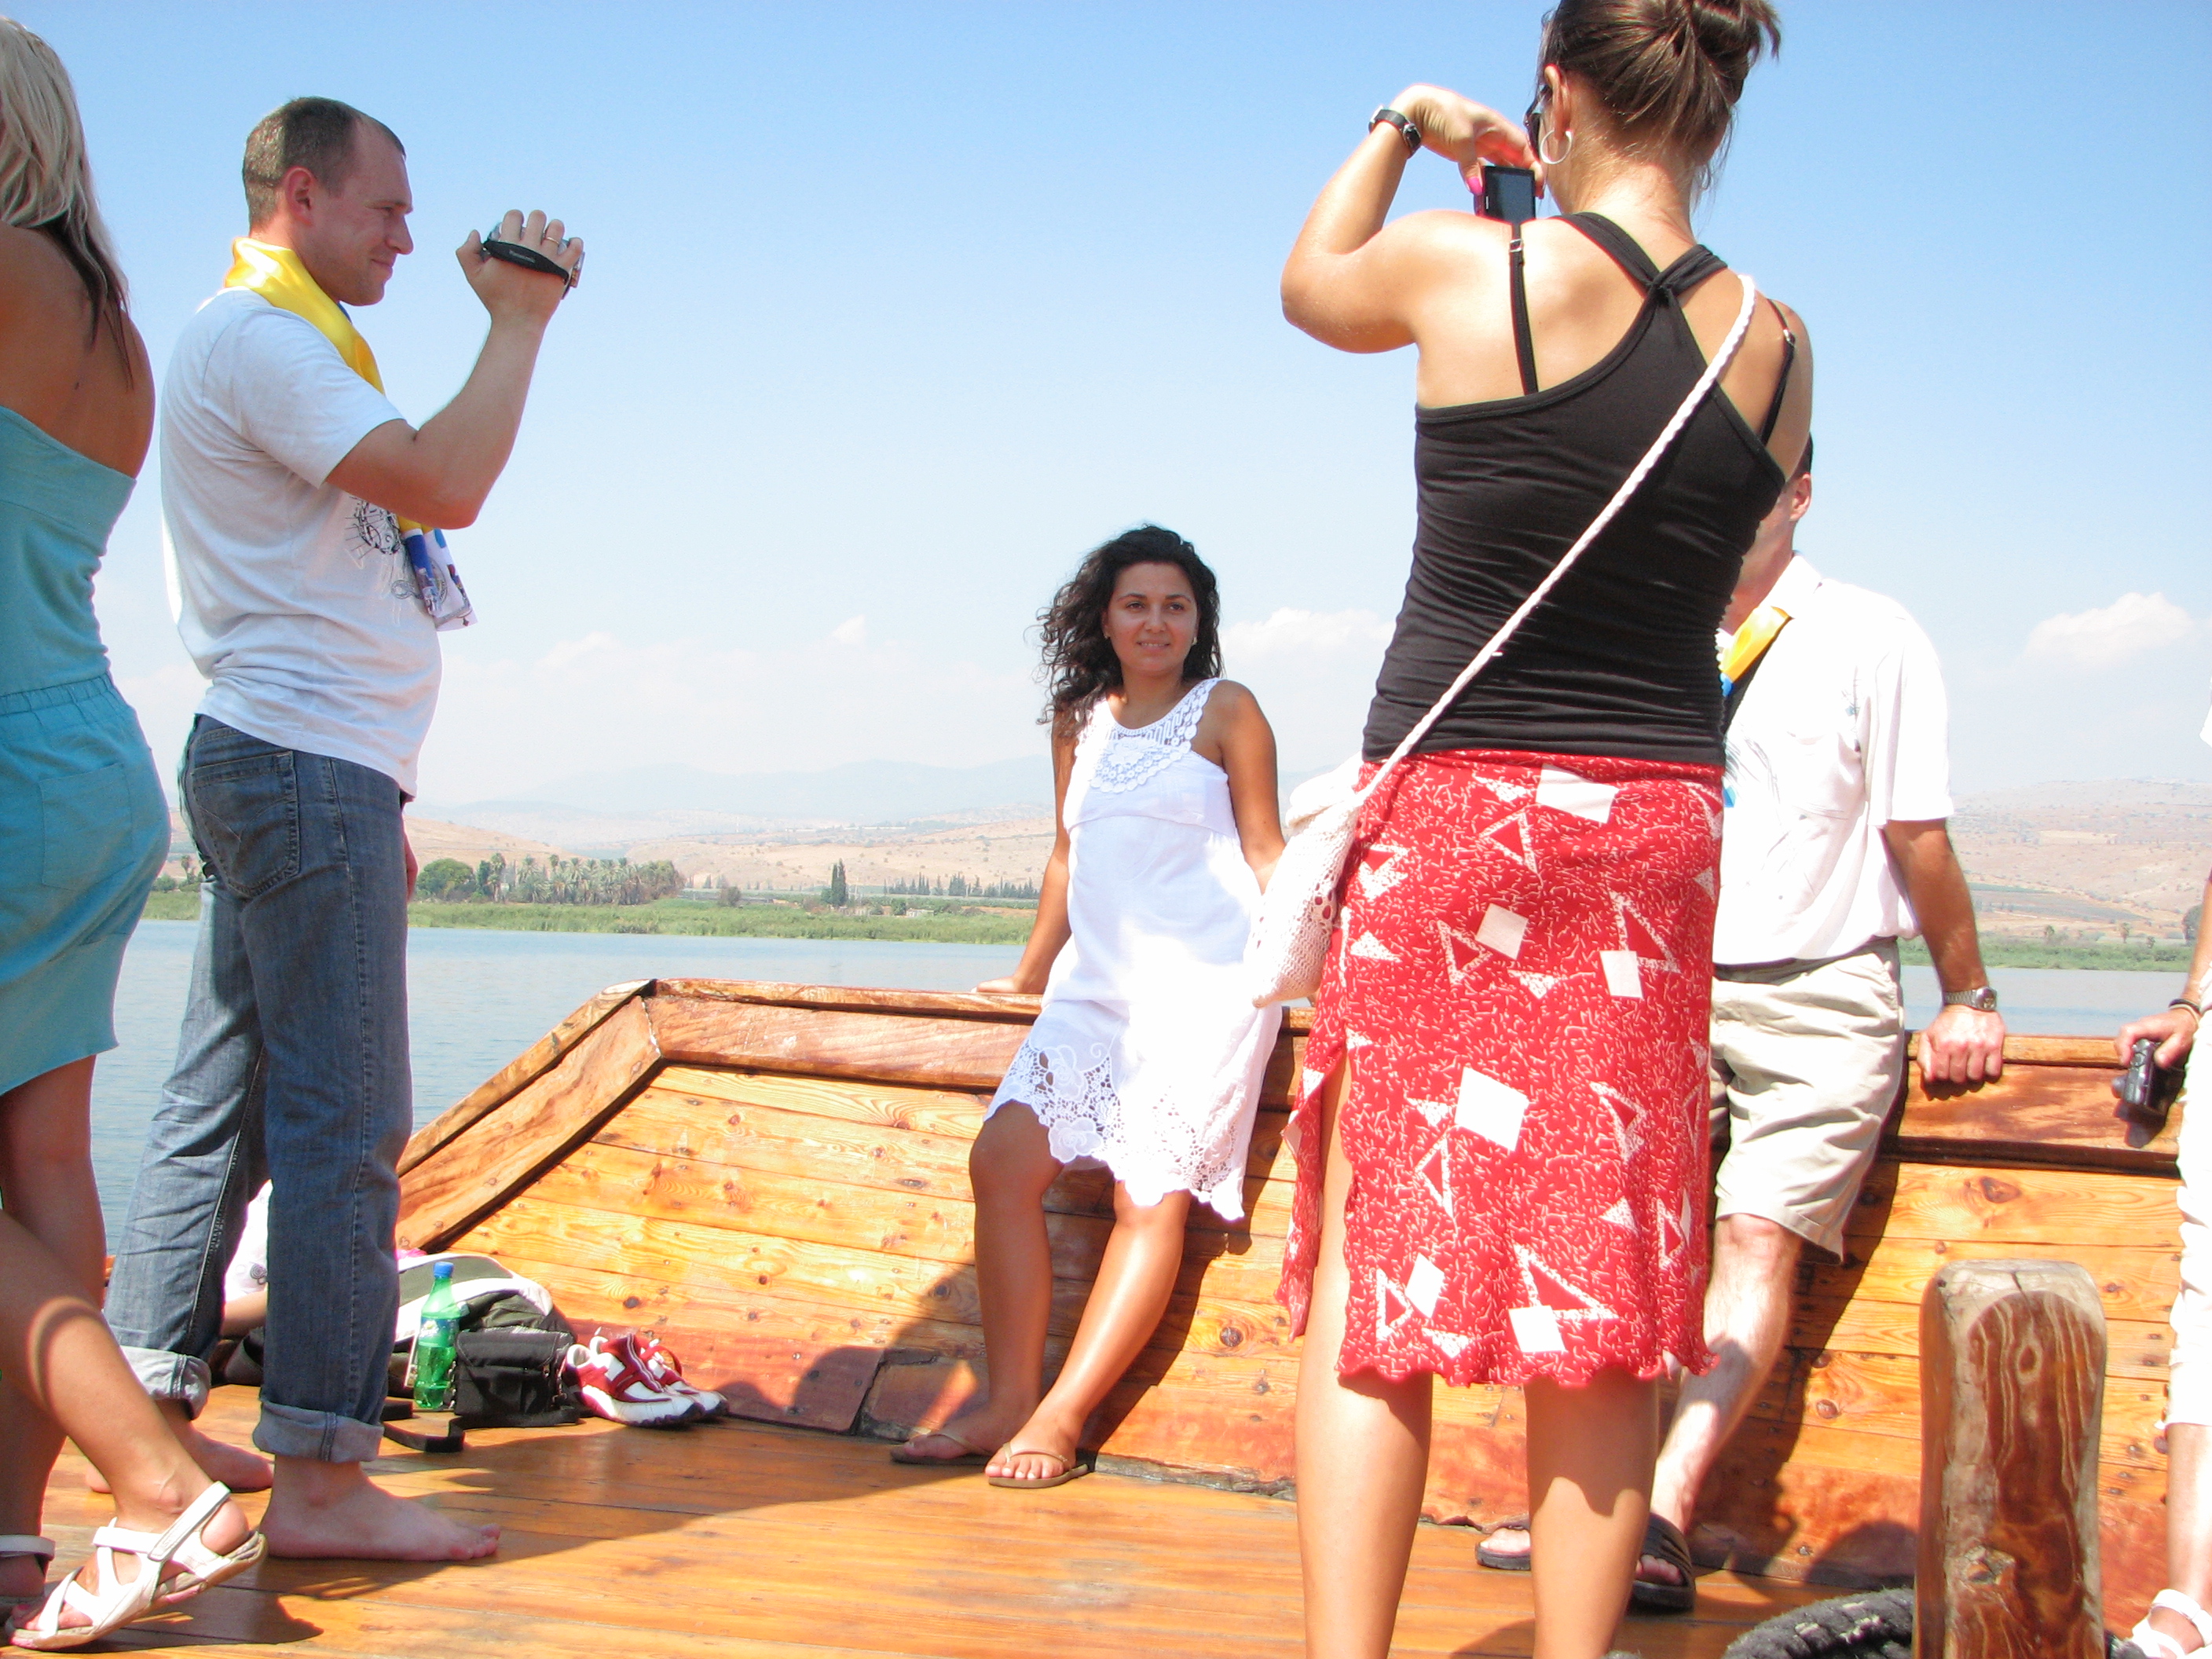 Christian pilgrims taking photos on a boat on the Galilean Sea (Lake) in Israel (where Jesus Christ preached), picture 11